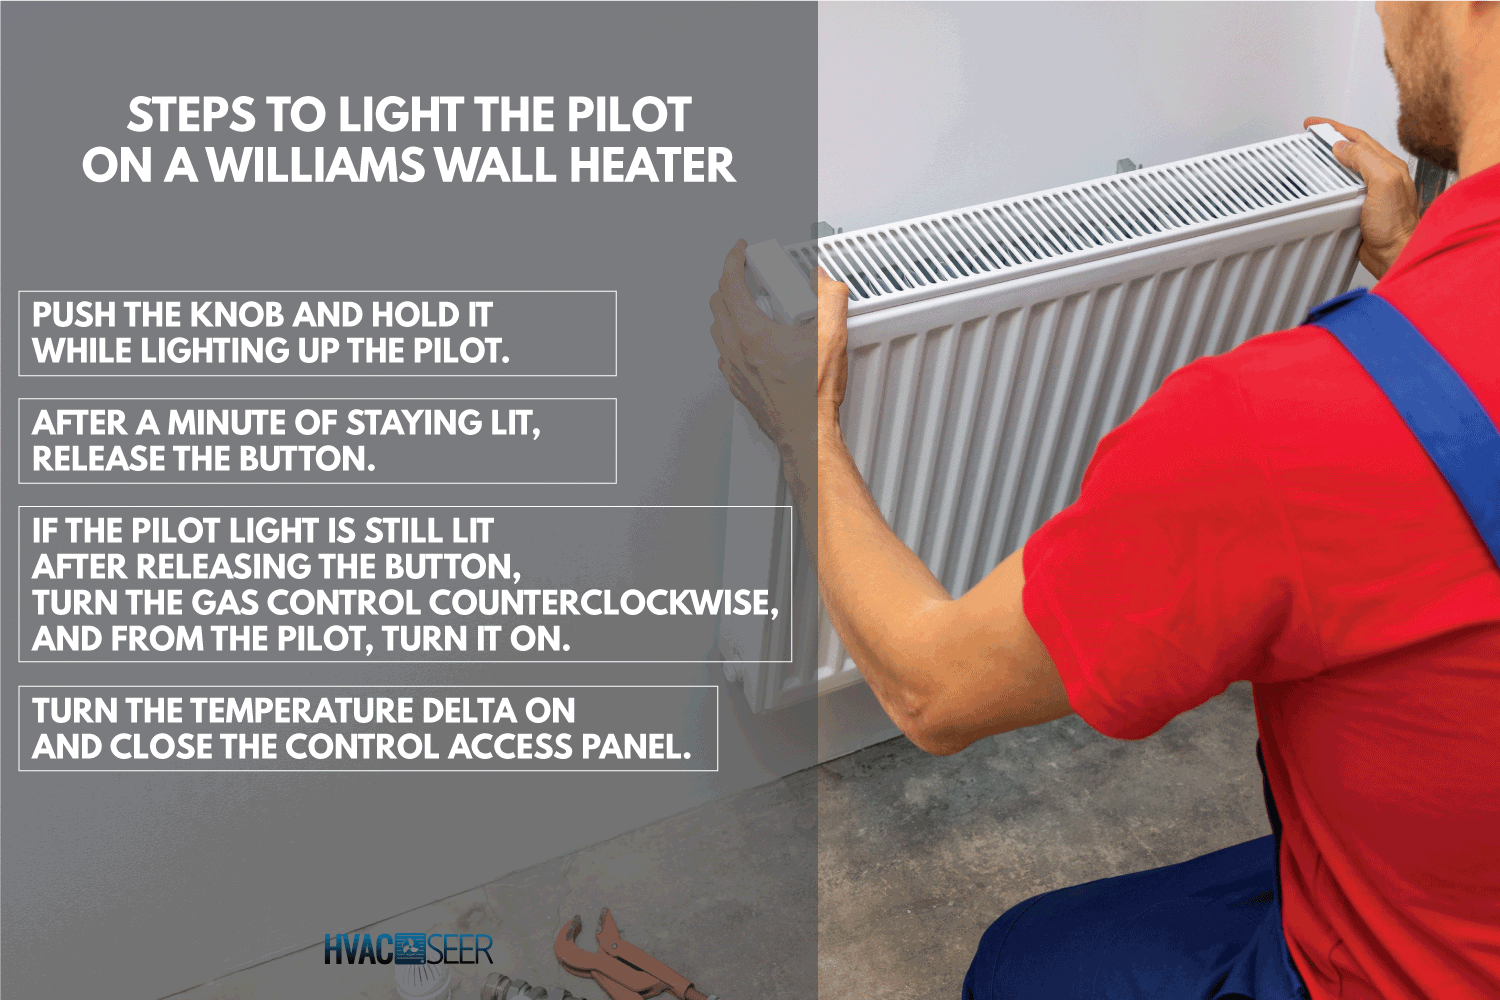 repair man opening wall heater. steps on How To Light The Pilot On A Williams Wall Heater